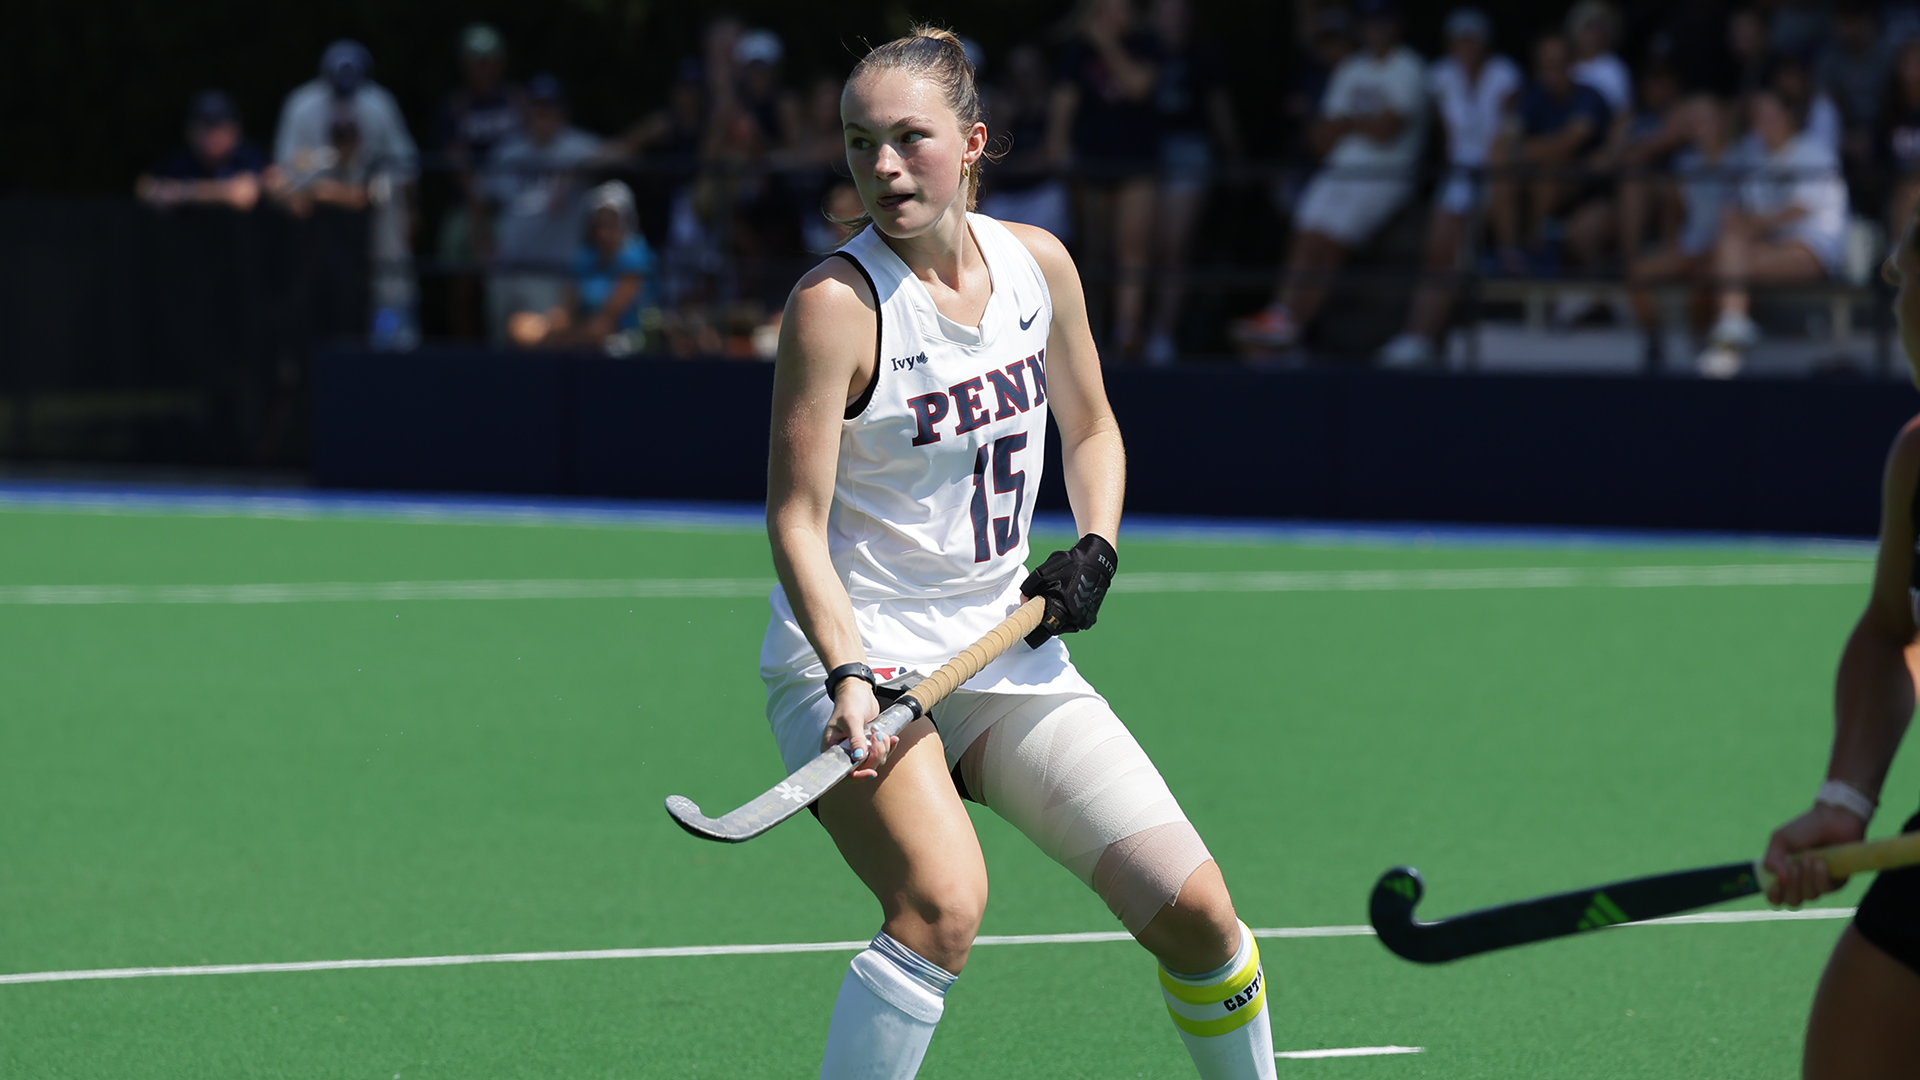 Allison Kuzyk patrols the field with her stick in her hands during a game.